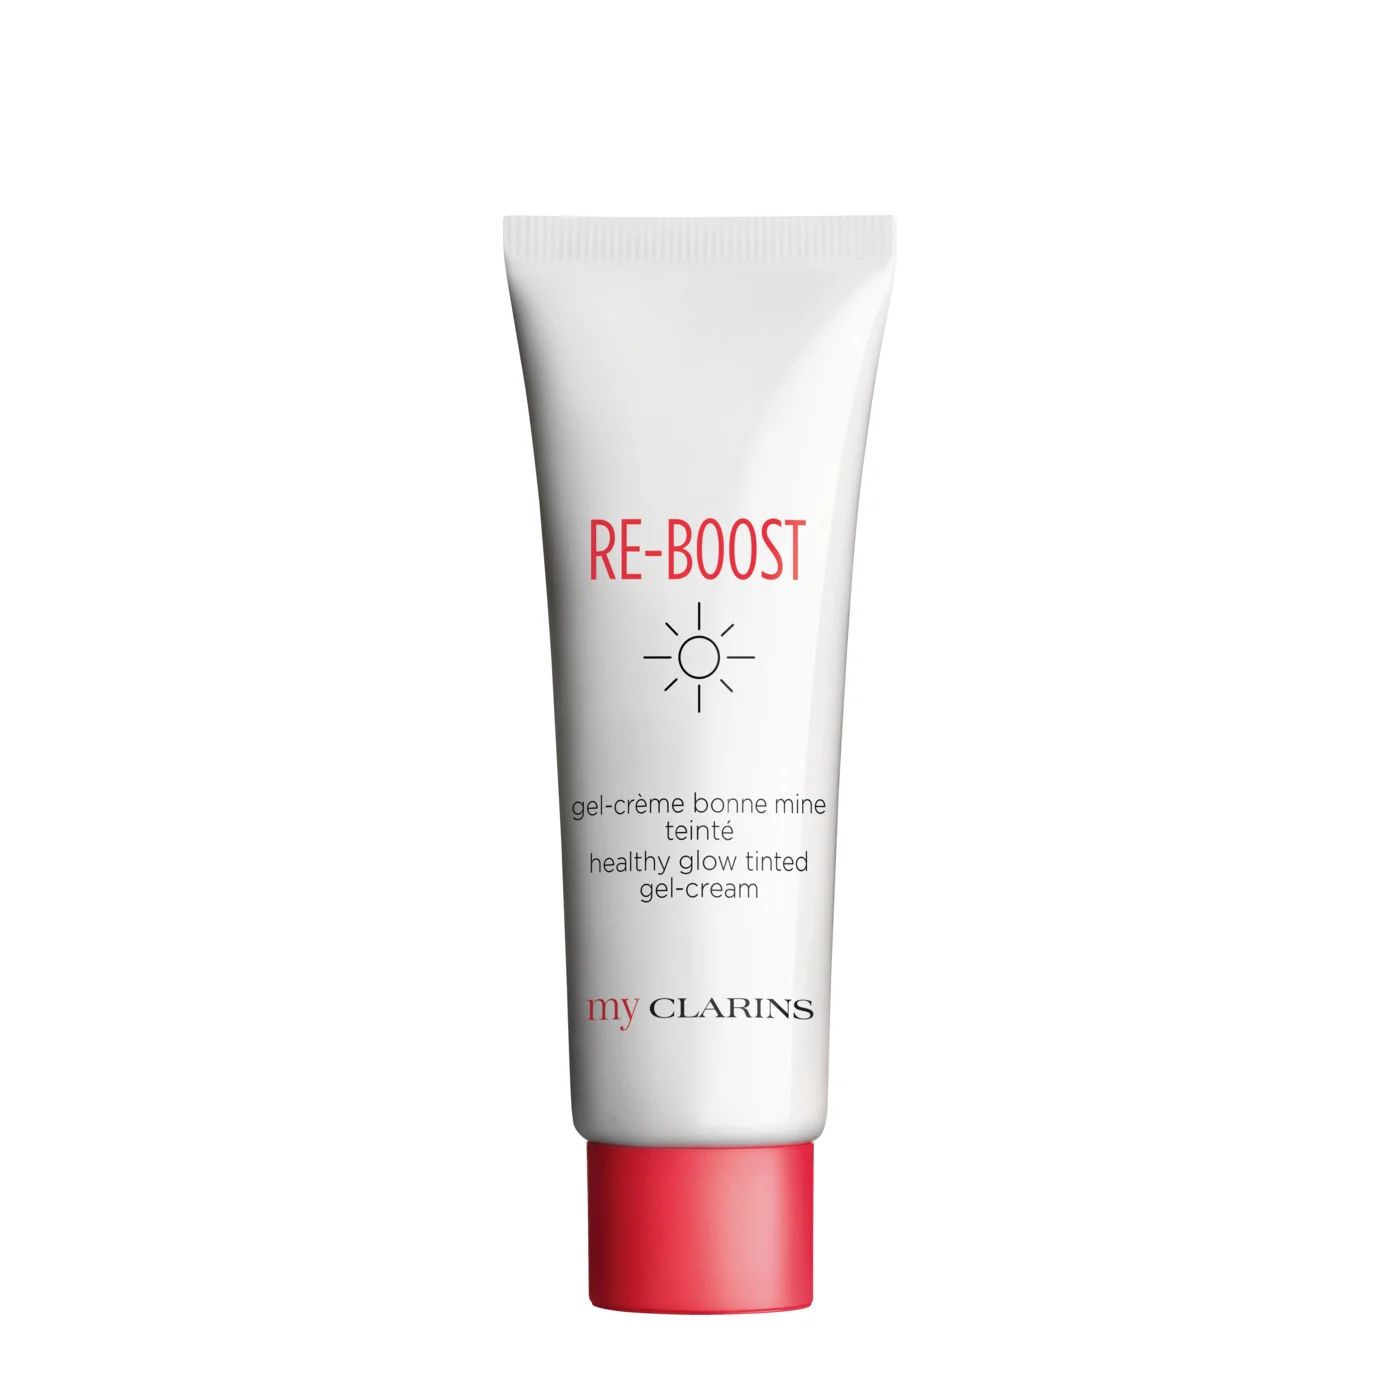 My Clarins RE-BOOST healthy glow tinted gel-cream | Clarins USA